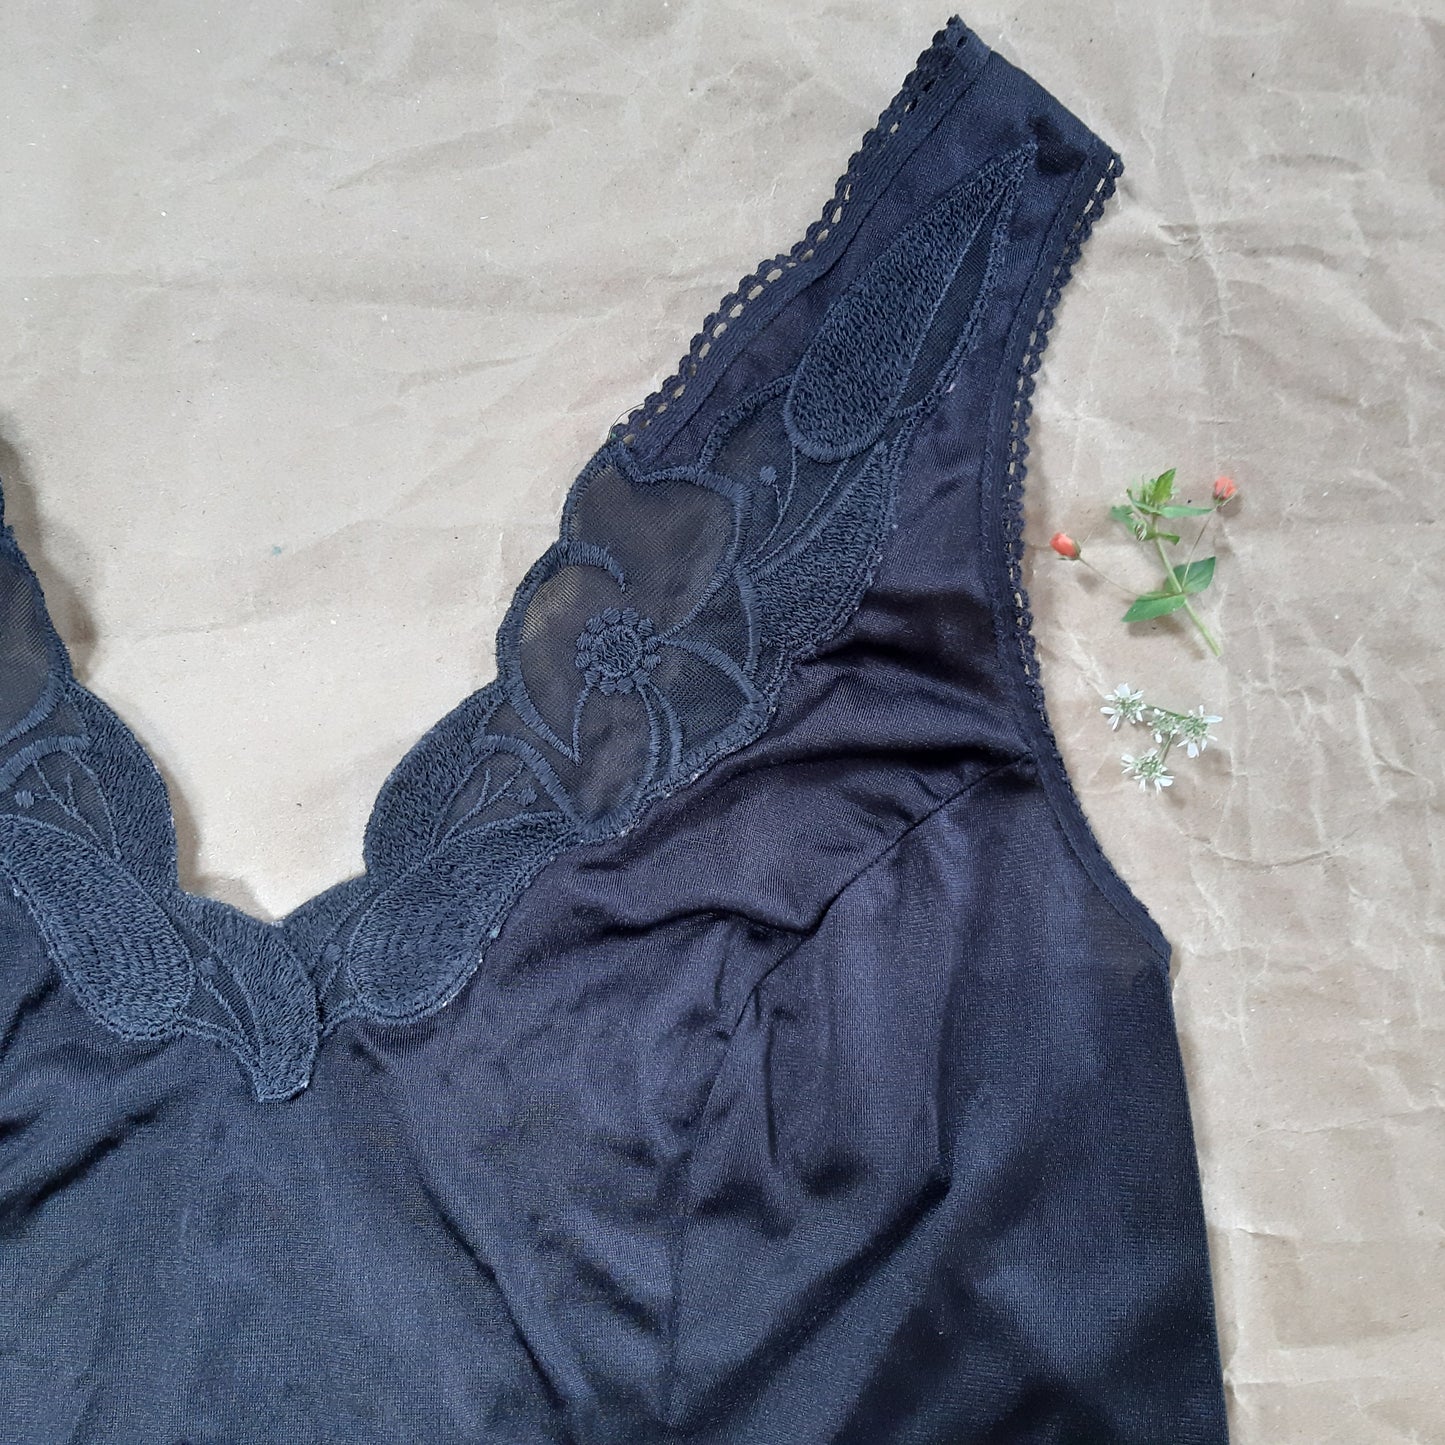 Black slip with woven floral trim